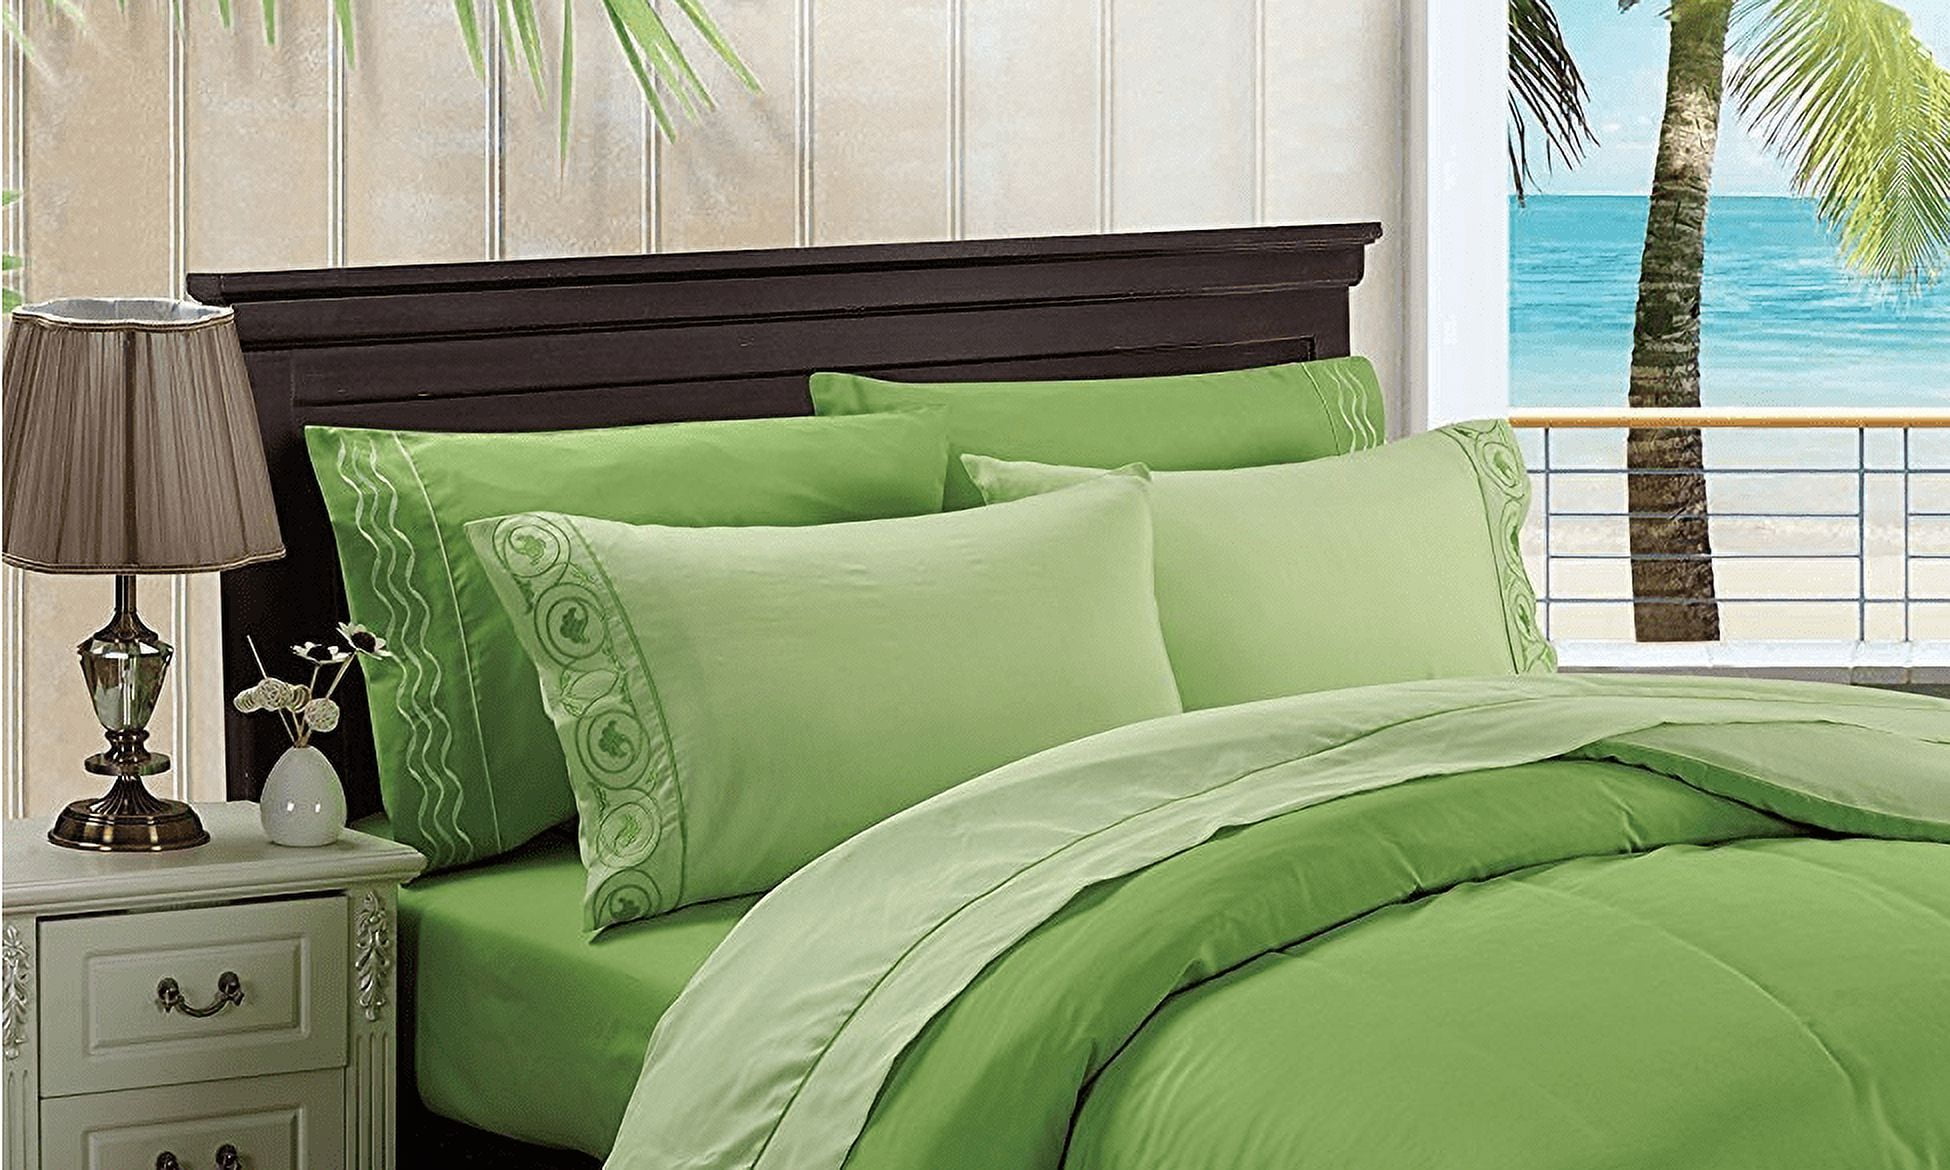 Buy Essenza Cotton King Bed Sheet 220X254 CM in Light Green Colour